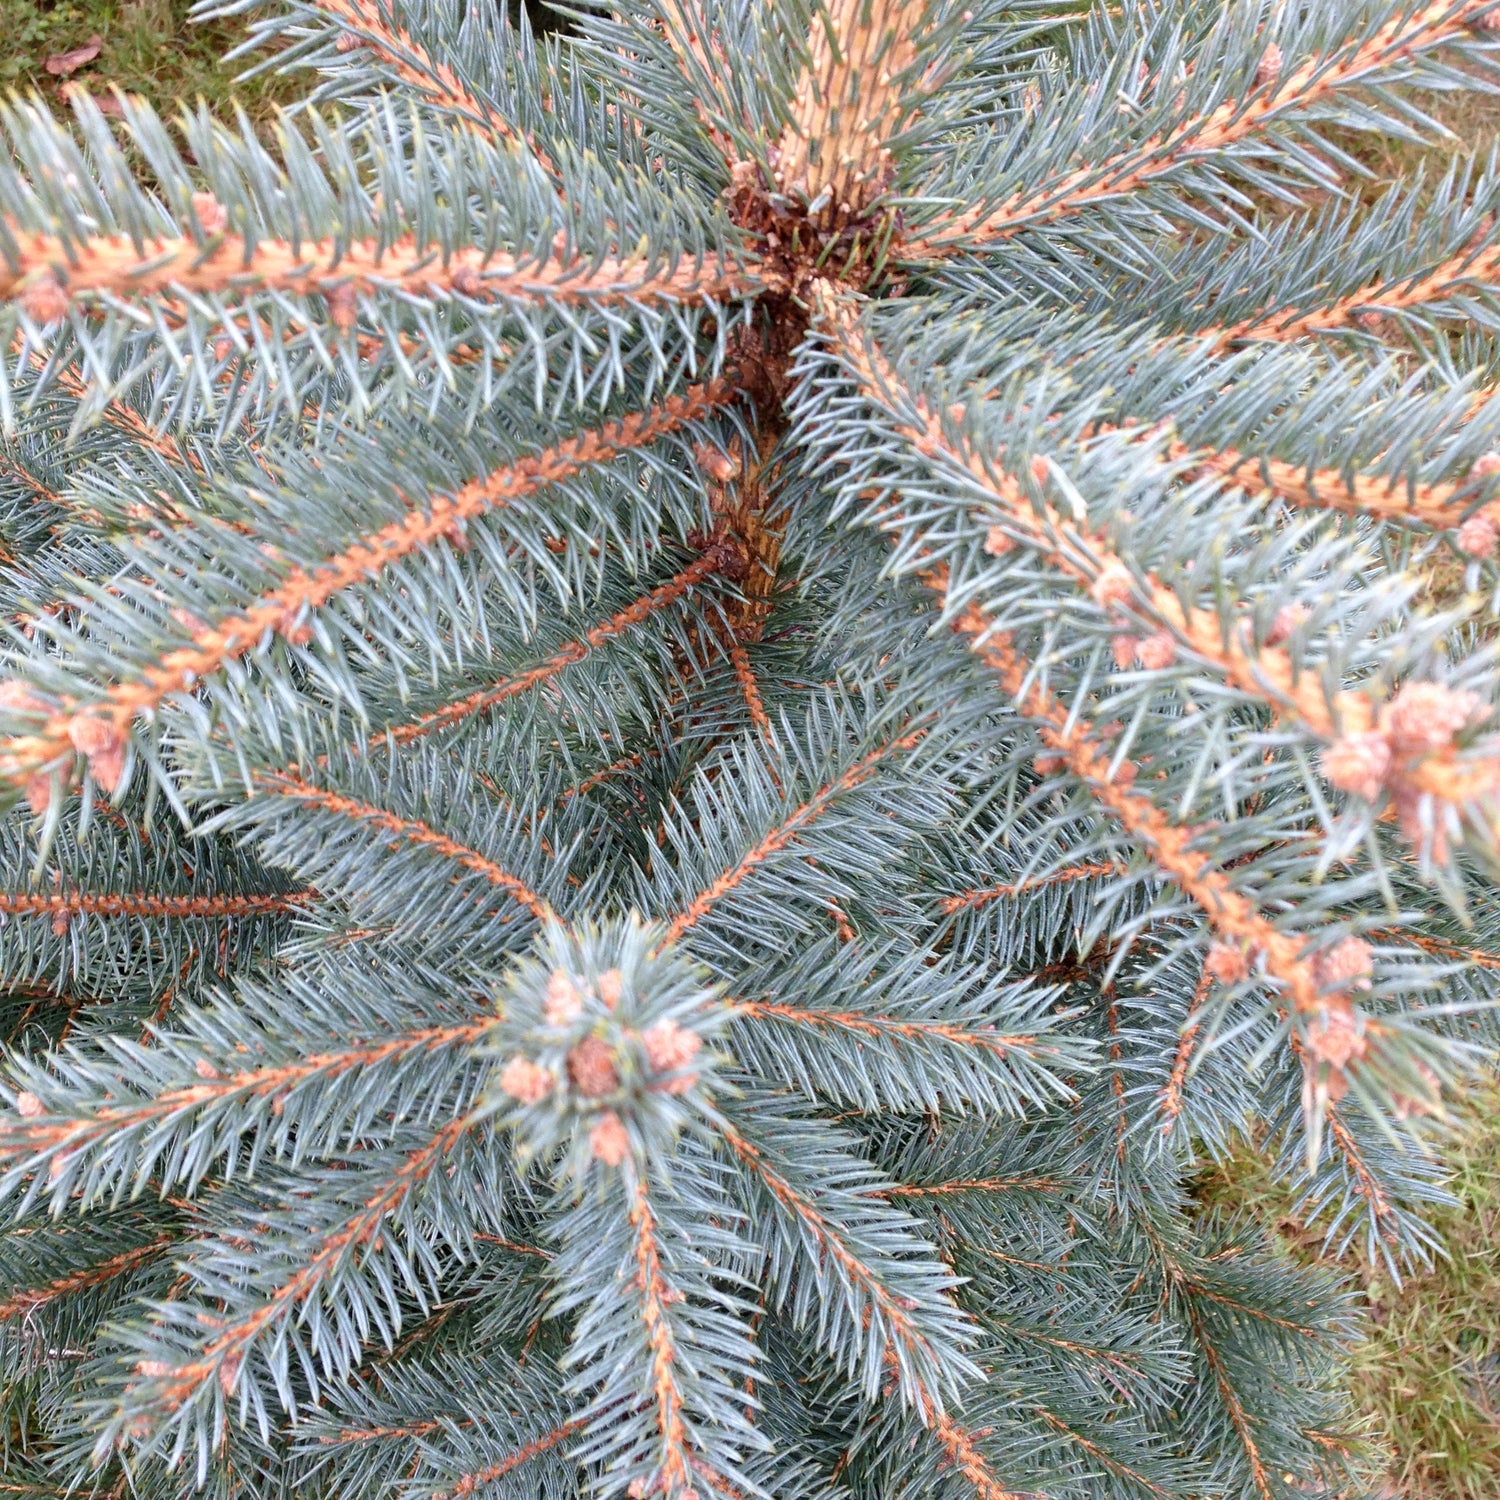 Blue Spruce Christmas trees are bushy trees with a strong festive pine aroma. Trees are varying shades of icy white-green to blue. We have 5 sizes available ranging from 4-8ft.